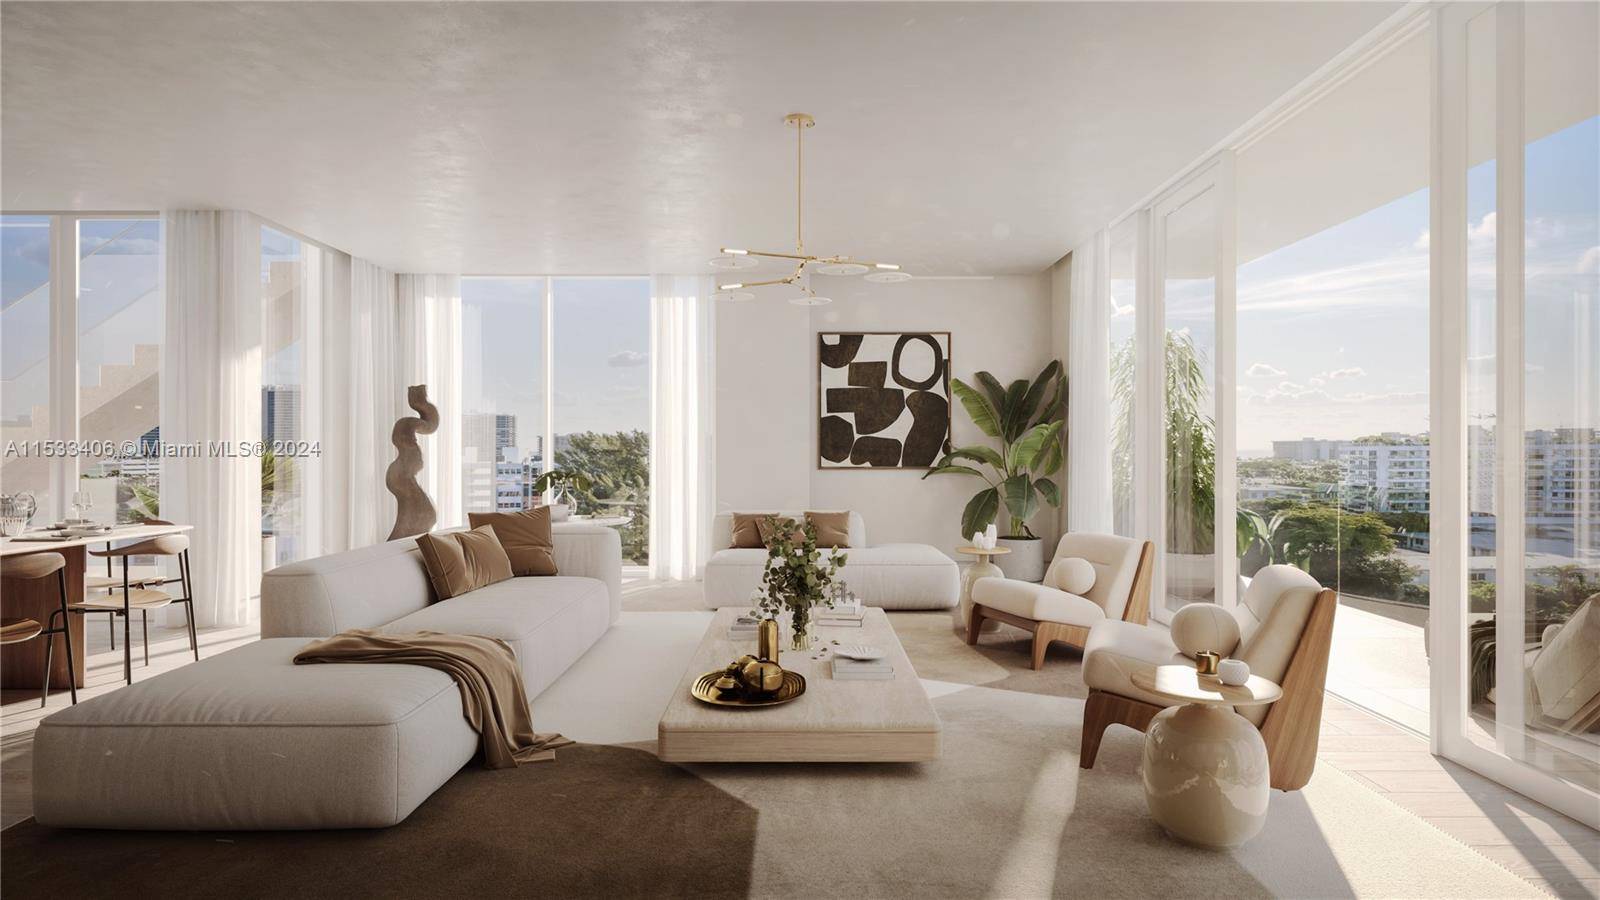 Solina is a boutique new development in Bay Harbor Islands, FL, comprising 7 residences and 2 penthouses emphasizing privacy, expansive interior space, private balconies and luxury island living.